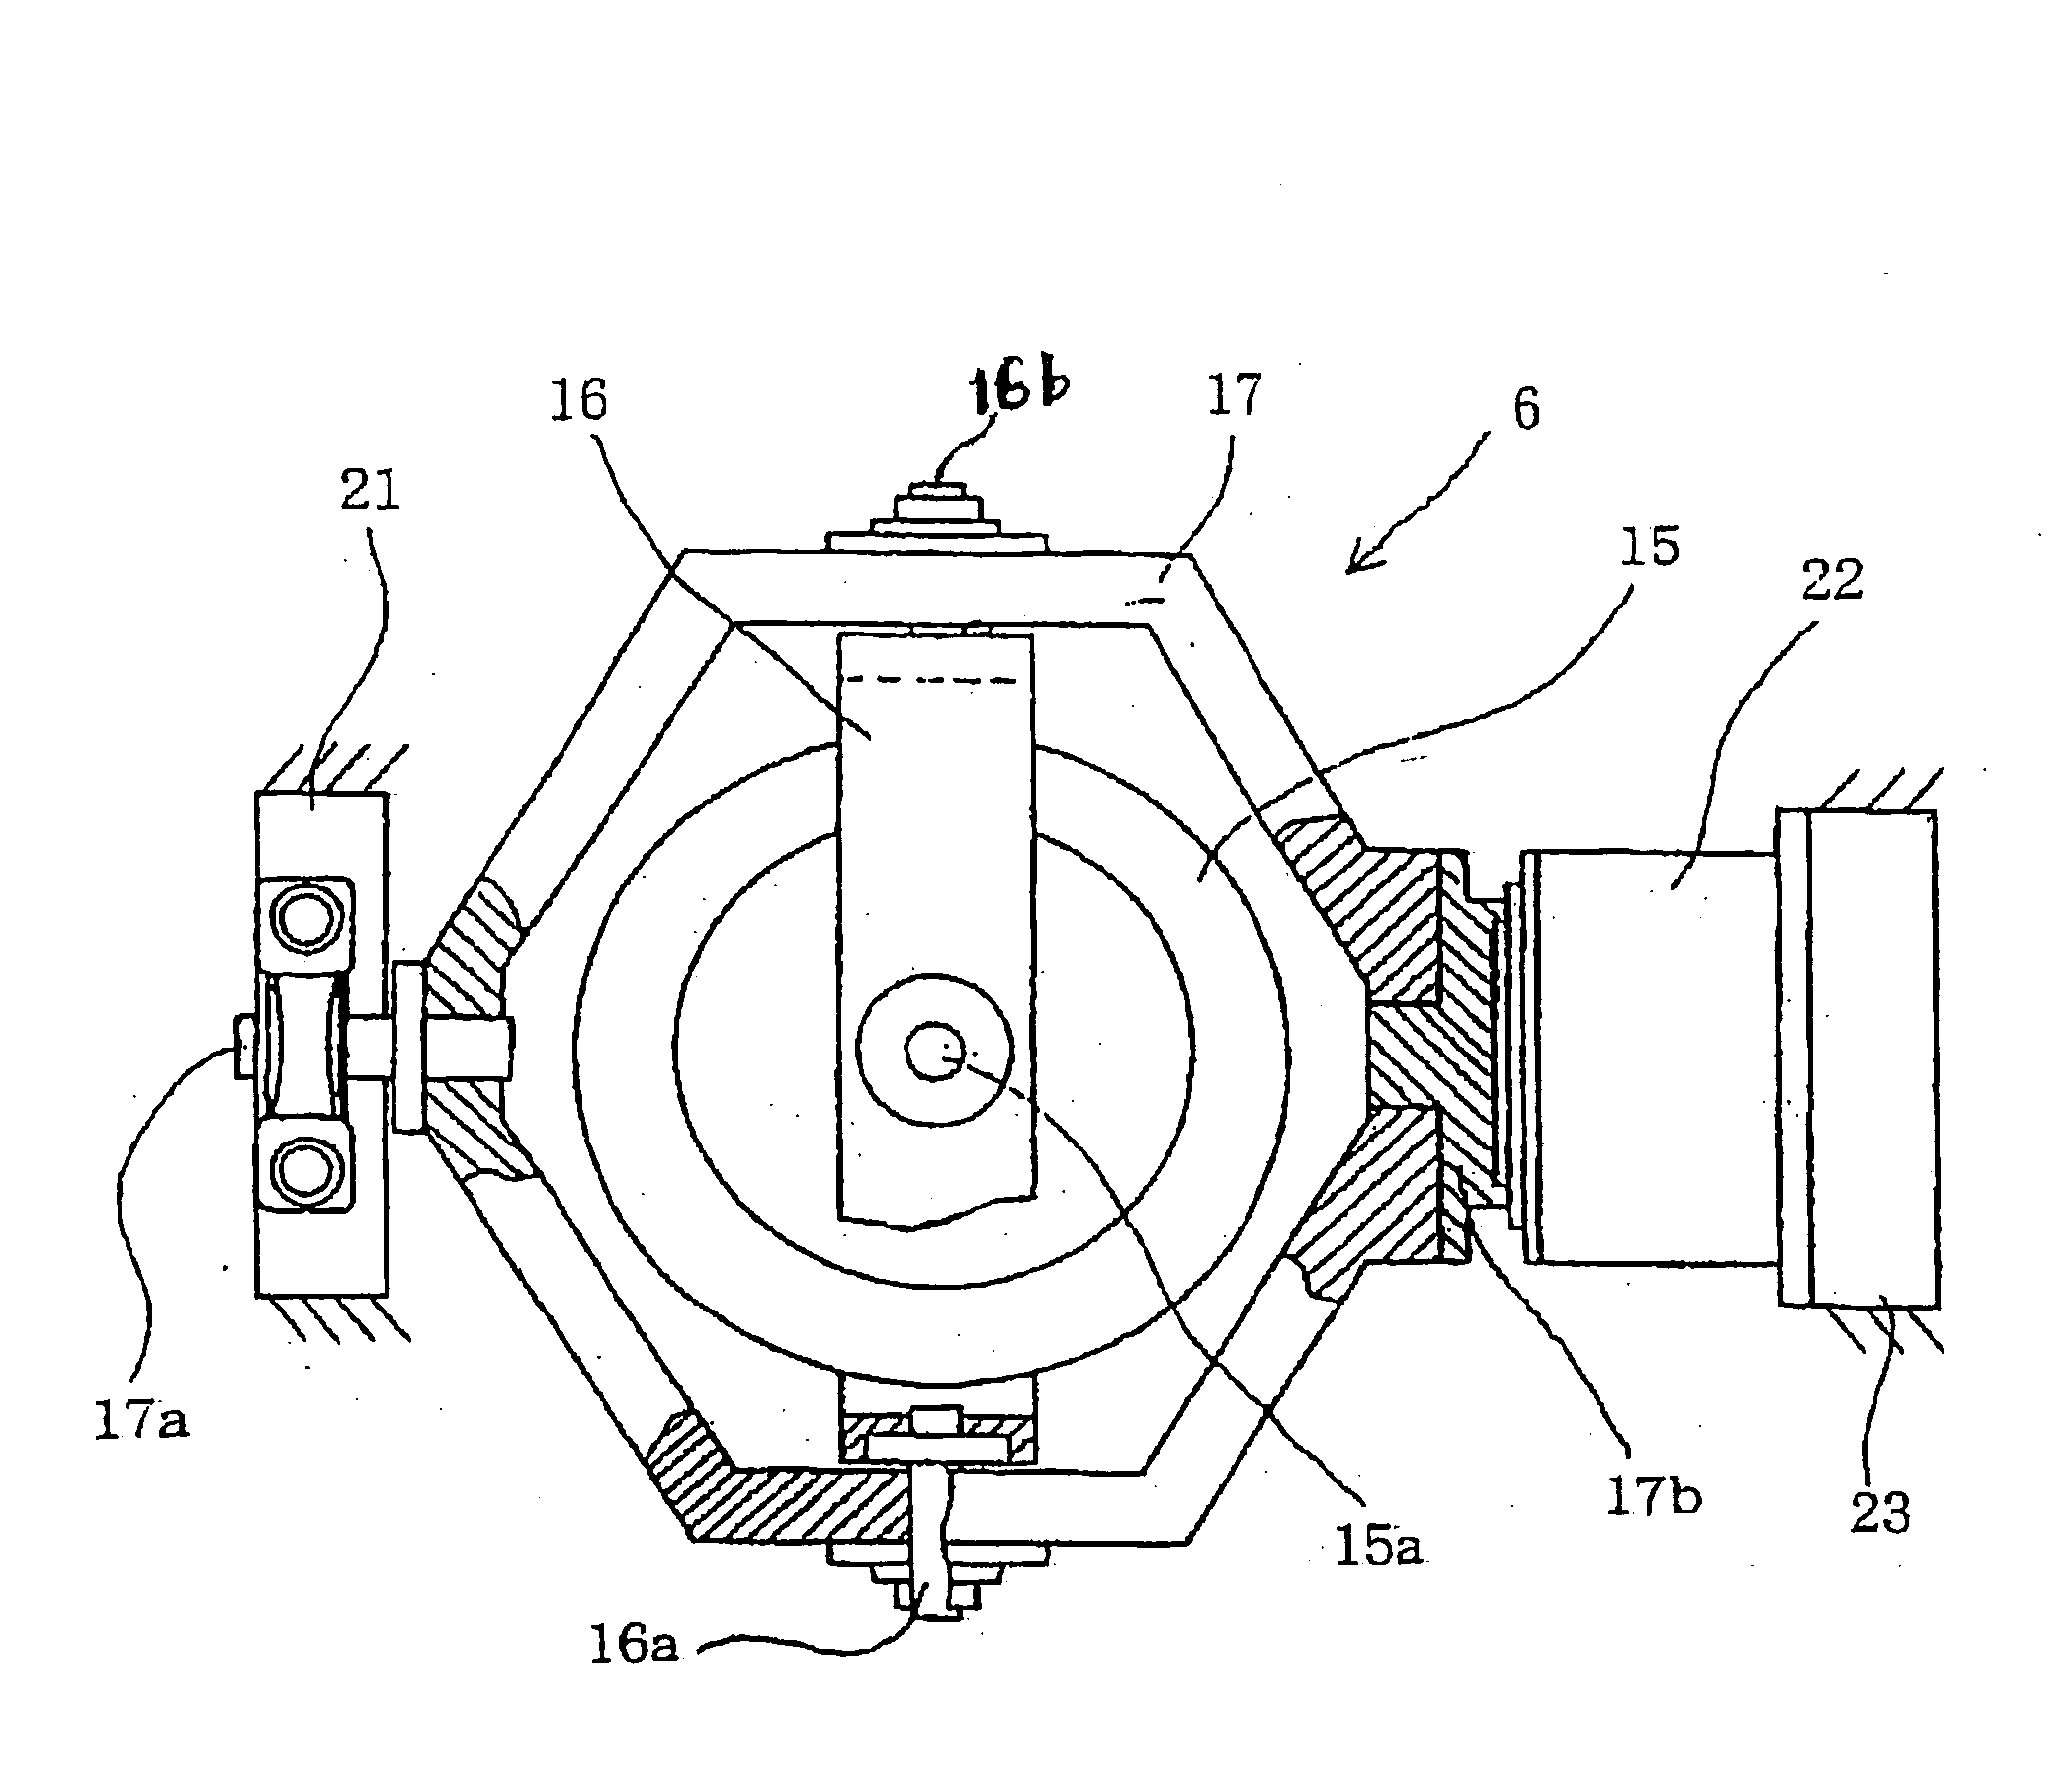 Self-supporting automatic vehicle